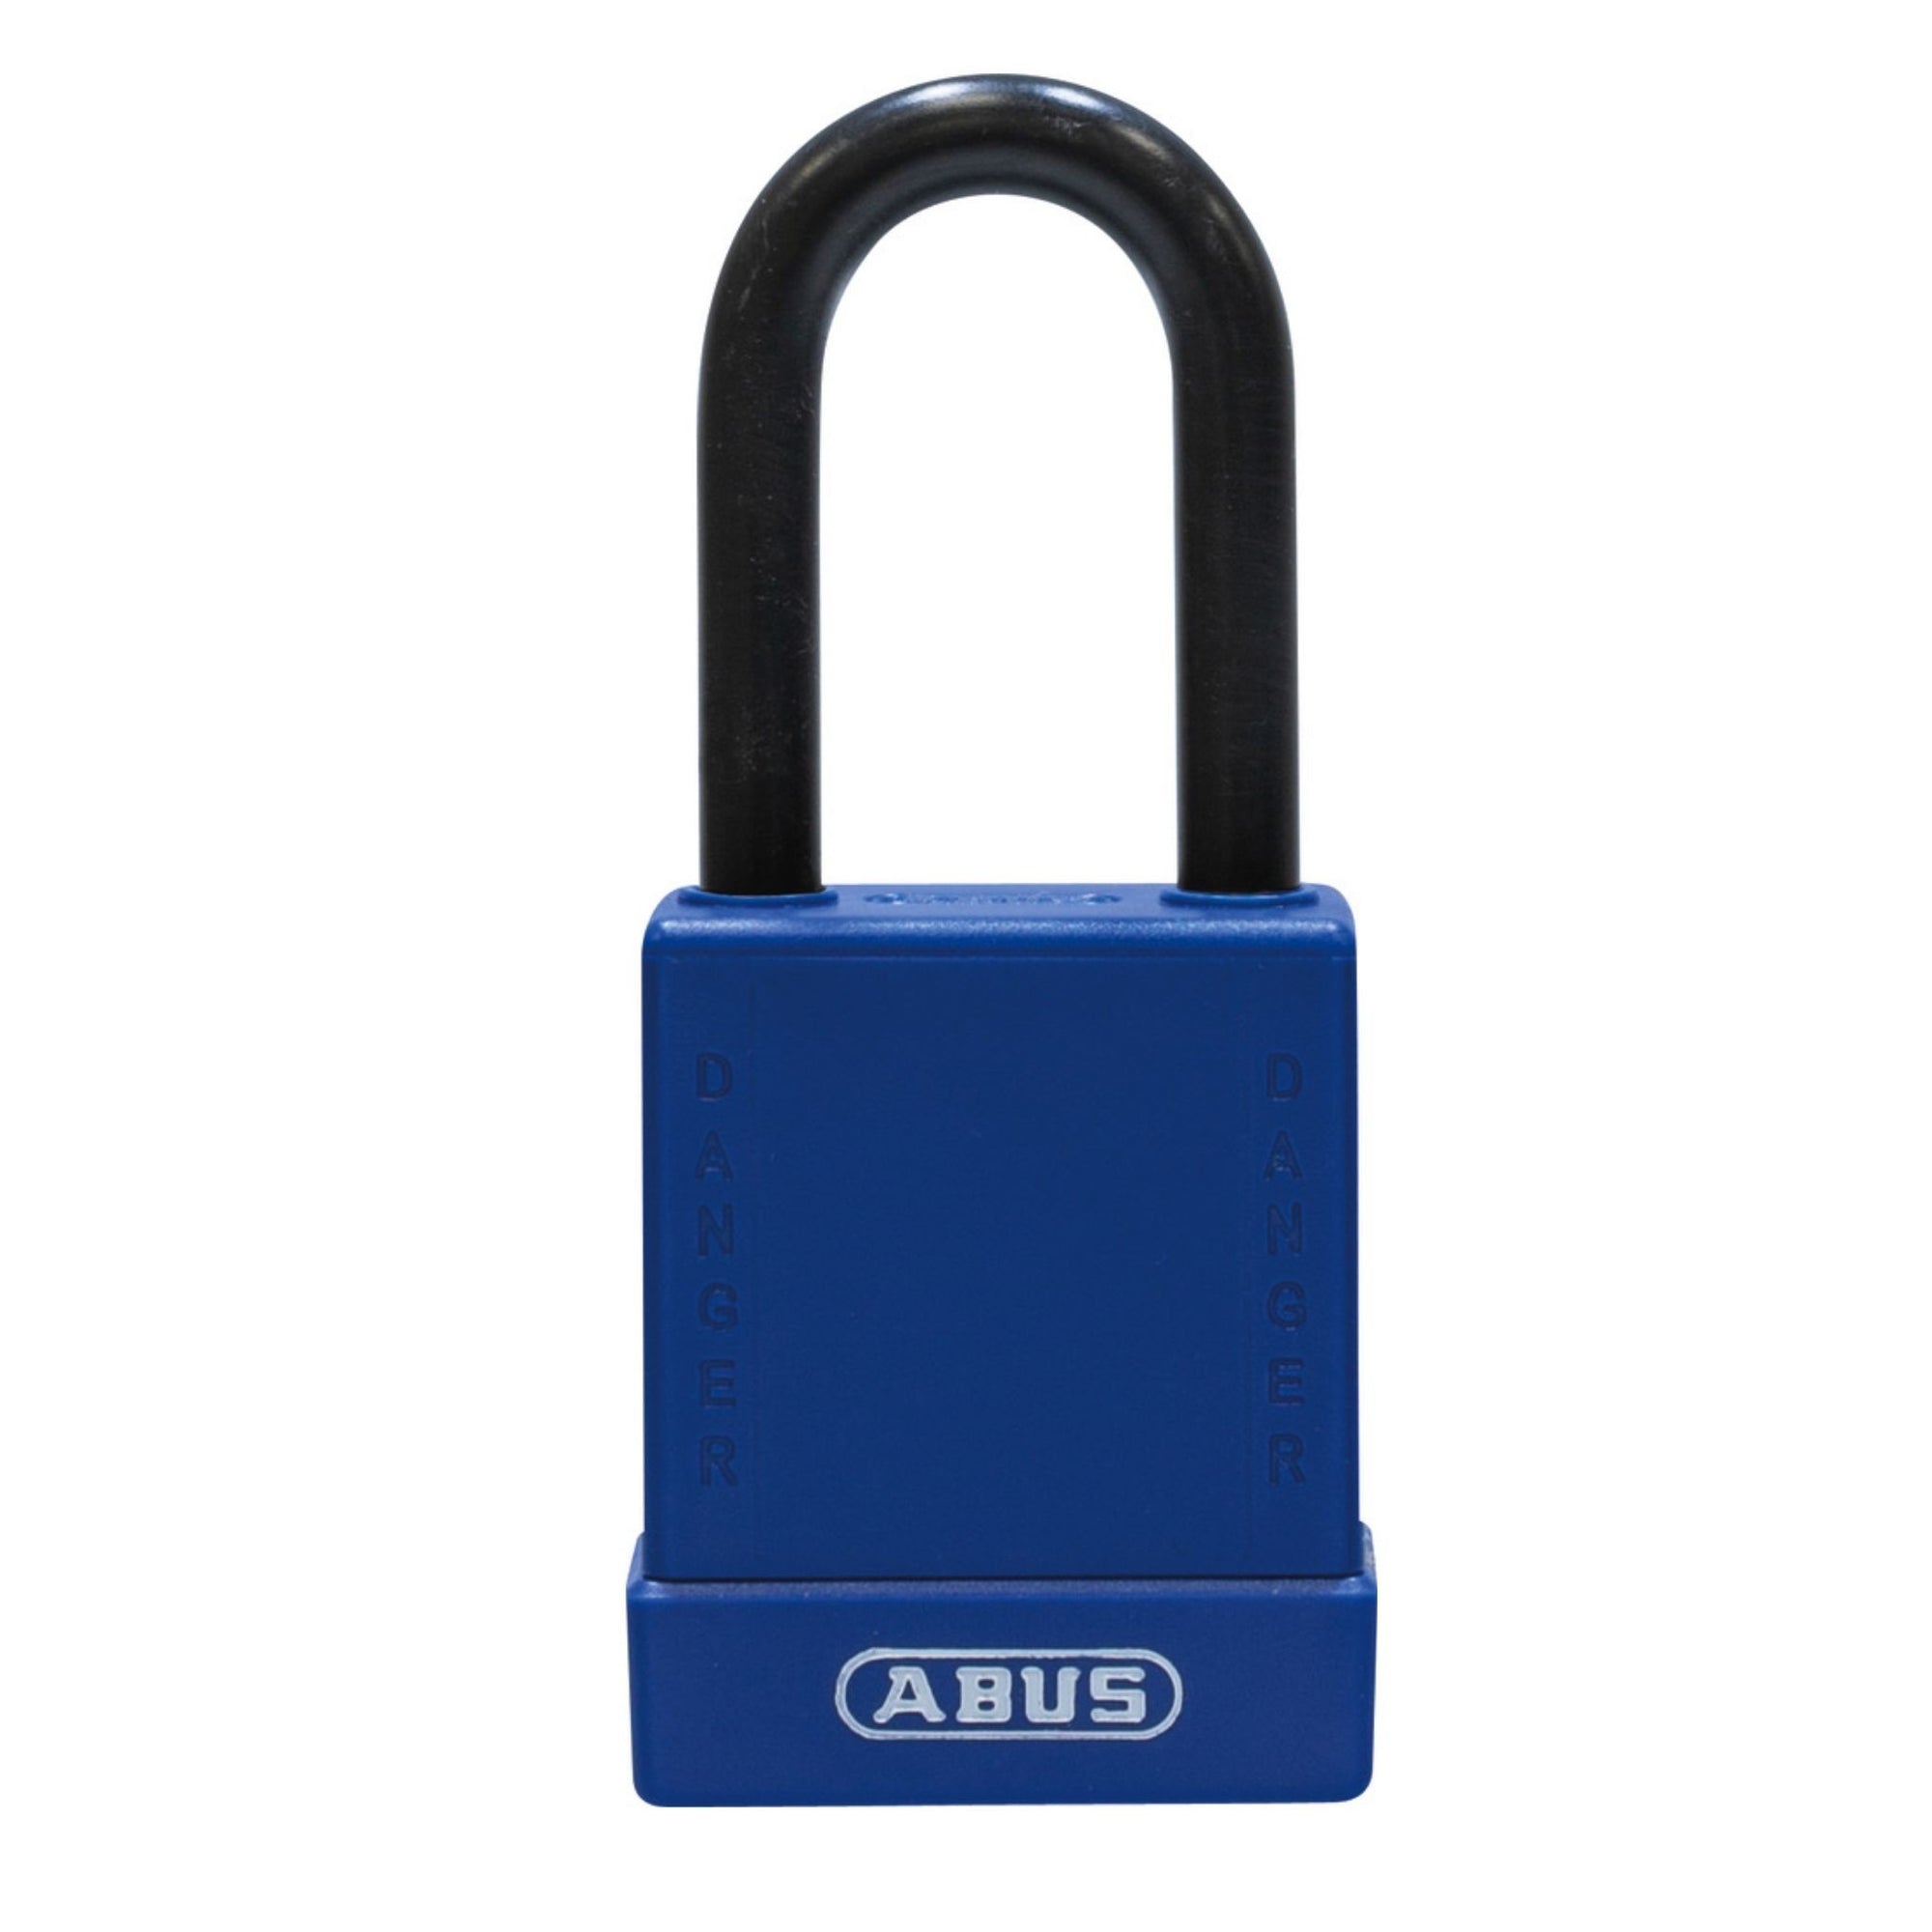 Abus 76/40 Blue High Security Lockout Tagout Safety Locks - The Lock Source